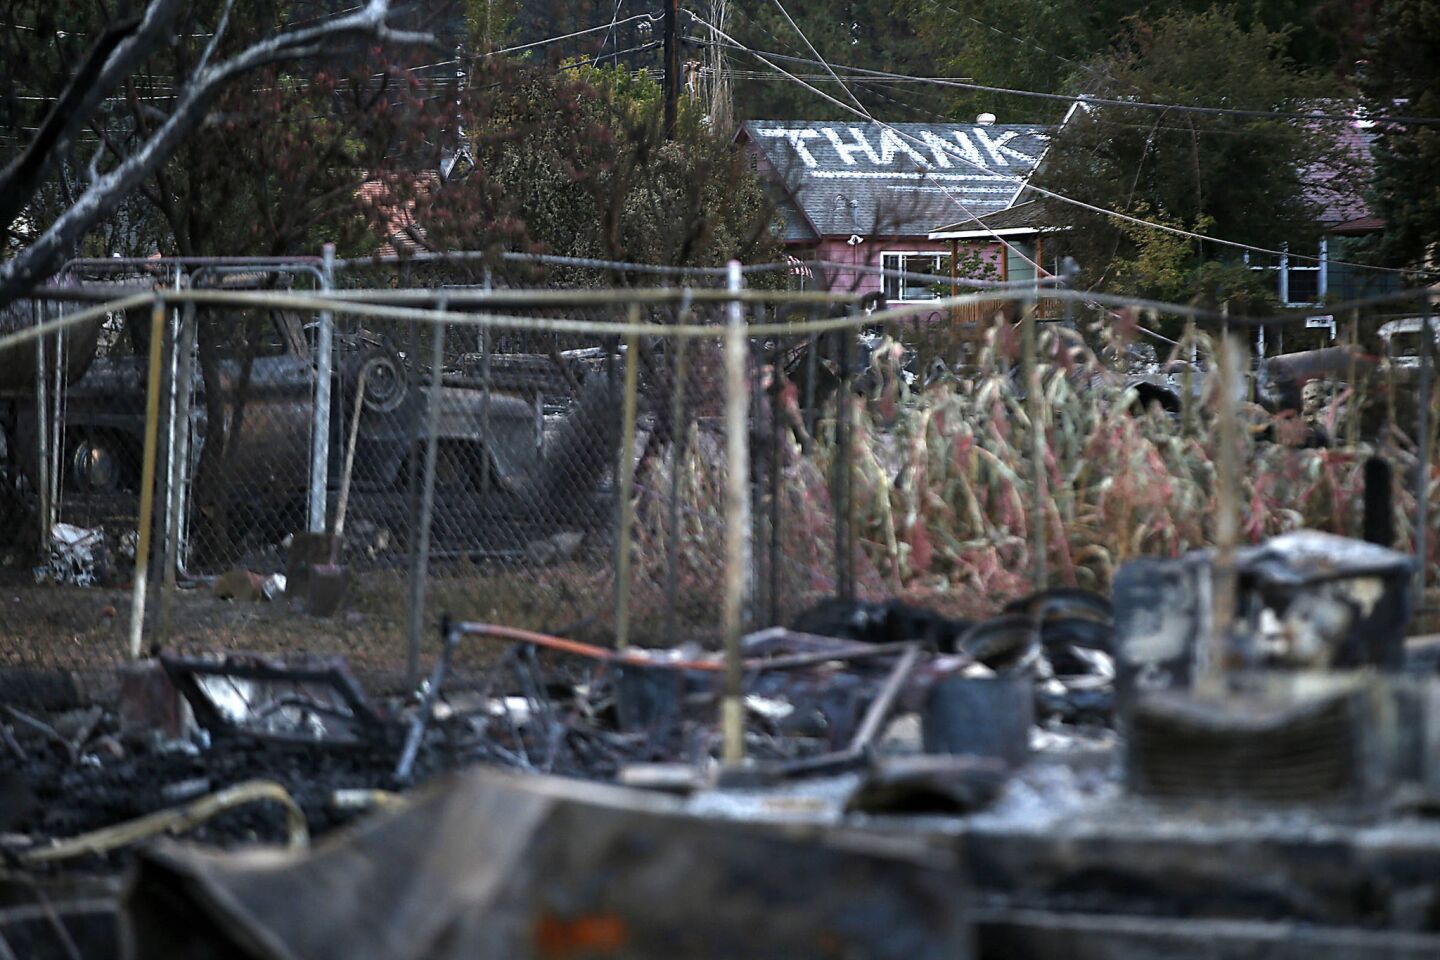 A sign of thanks painted on the rooftop of a home spared by the Boles fire can be seen from nearby lots of smoldering debris in Weed, Calif.